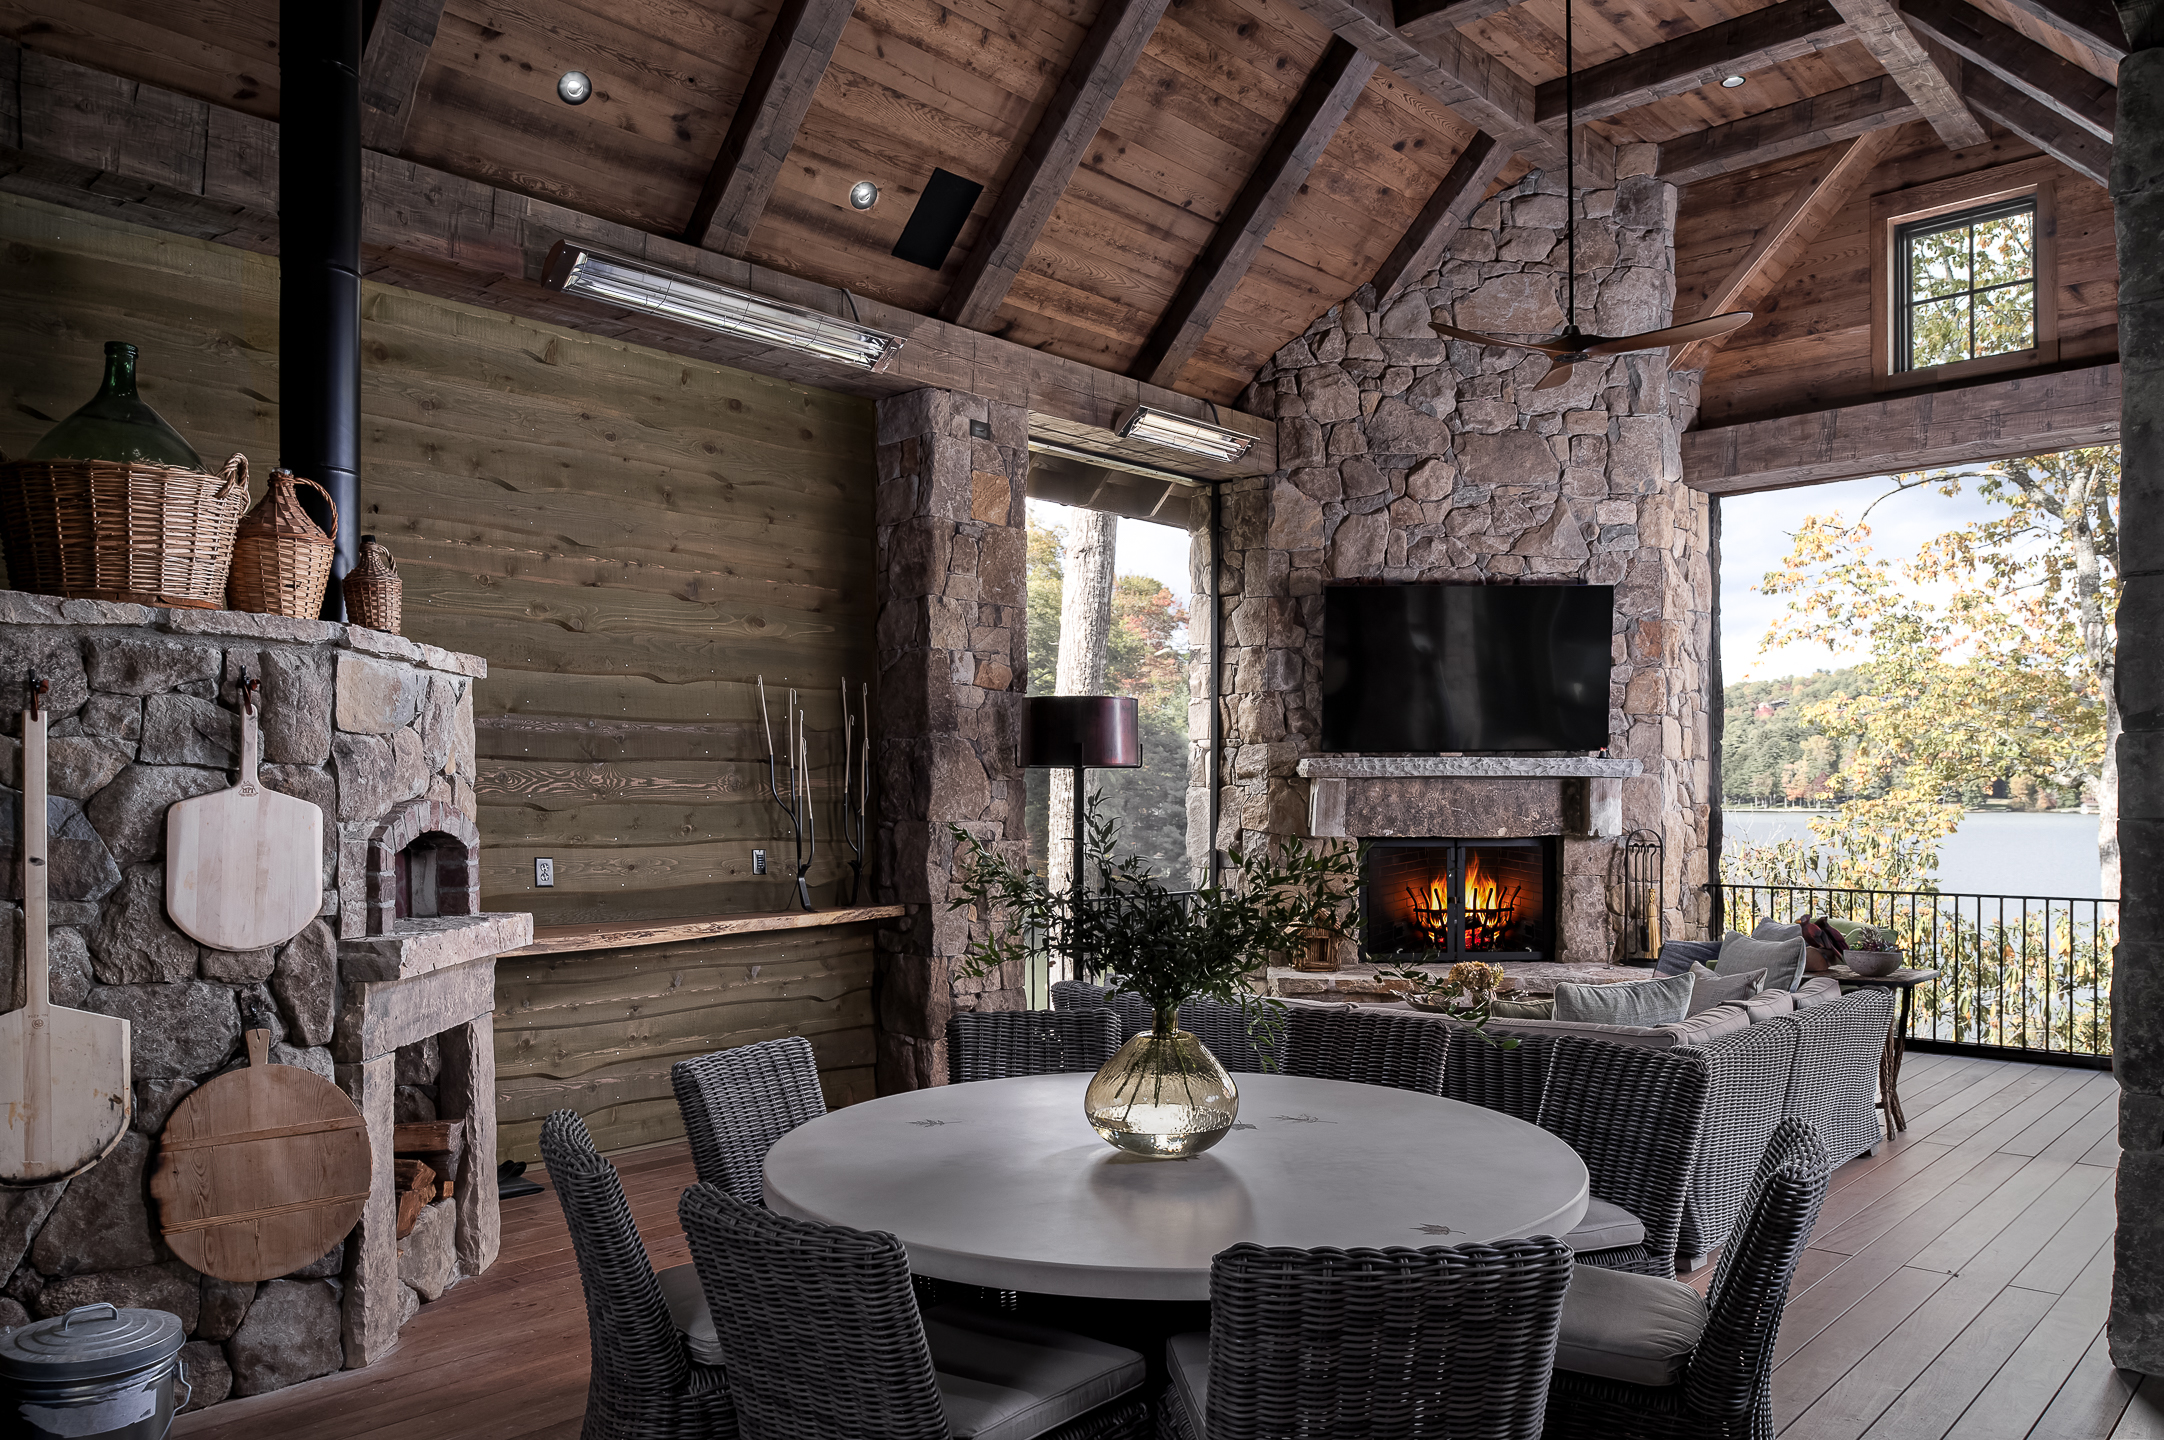 A living room with a fireplace and a dining table. captured by professional architectural photographer in North Carolina